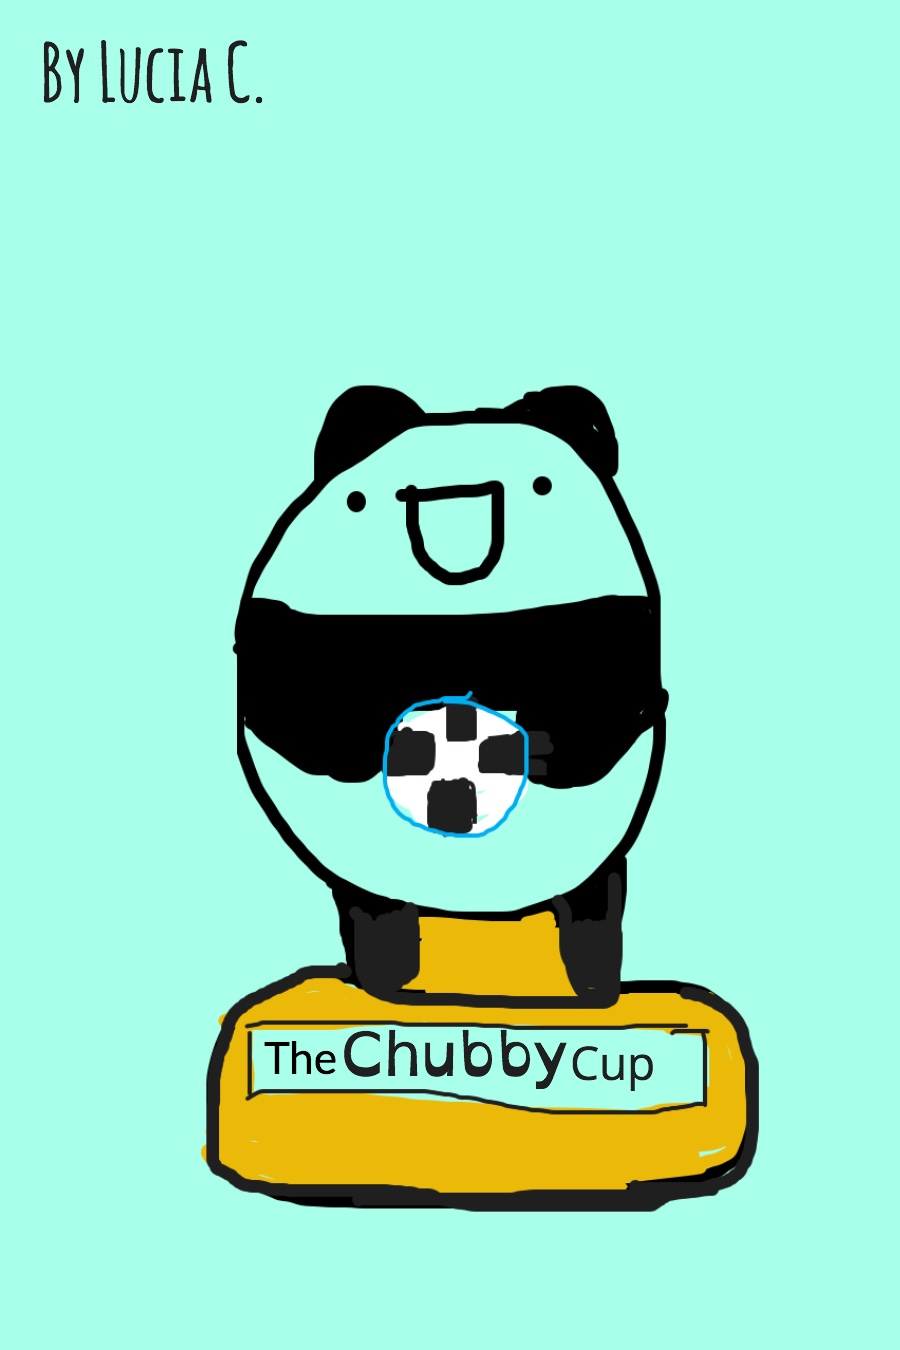 The Chubby Cup by Lucia C